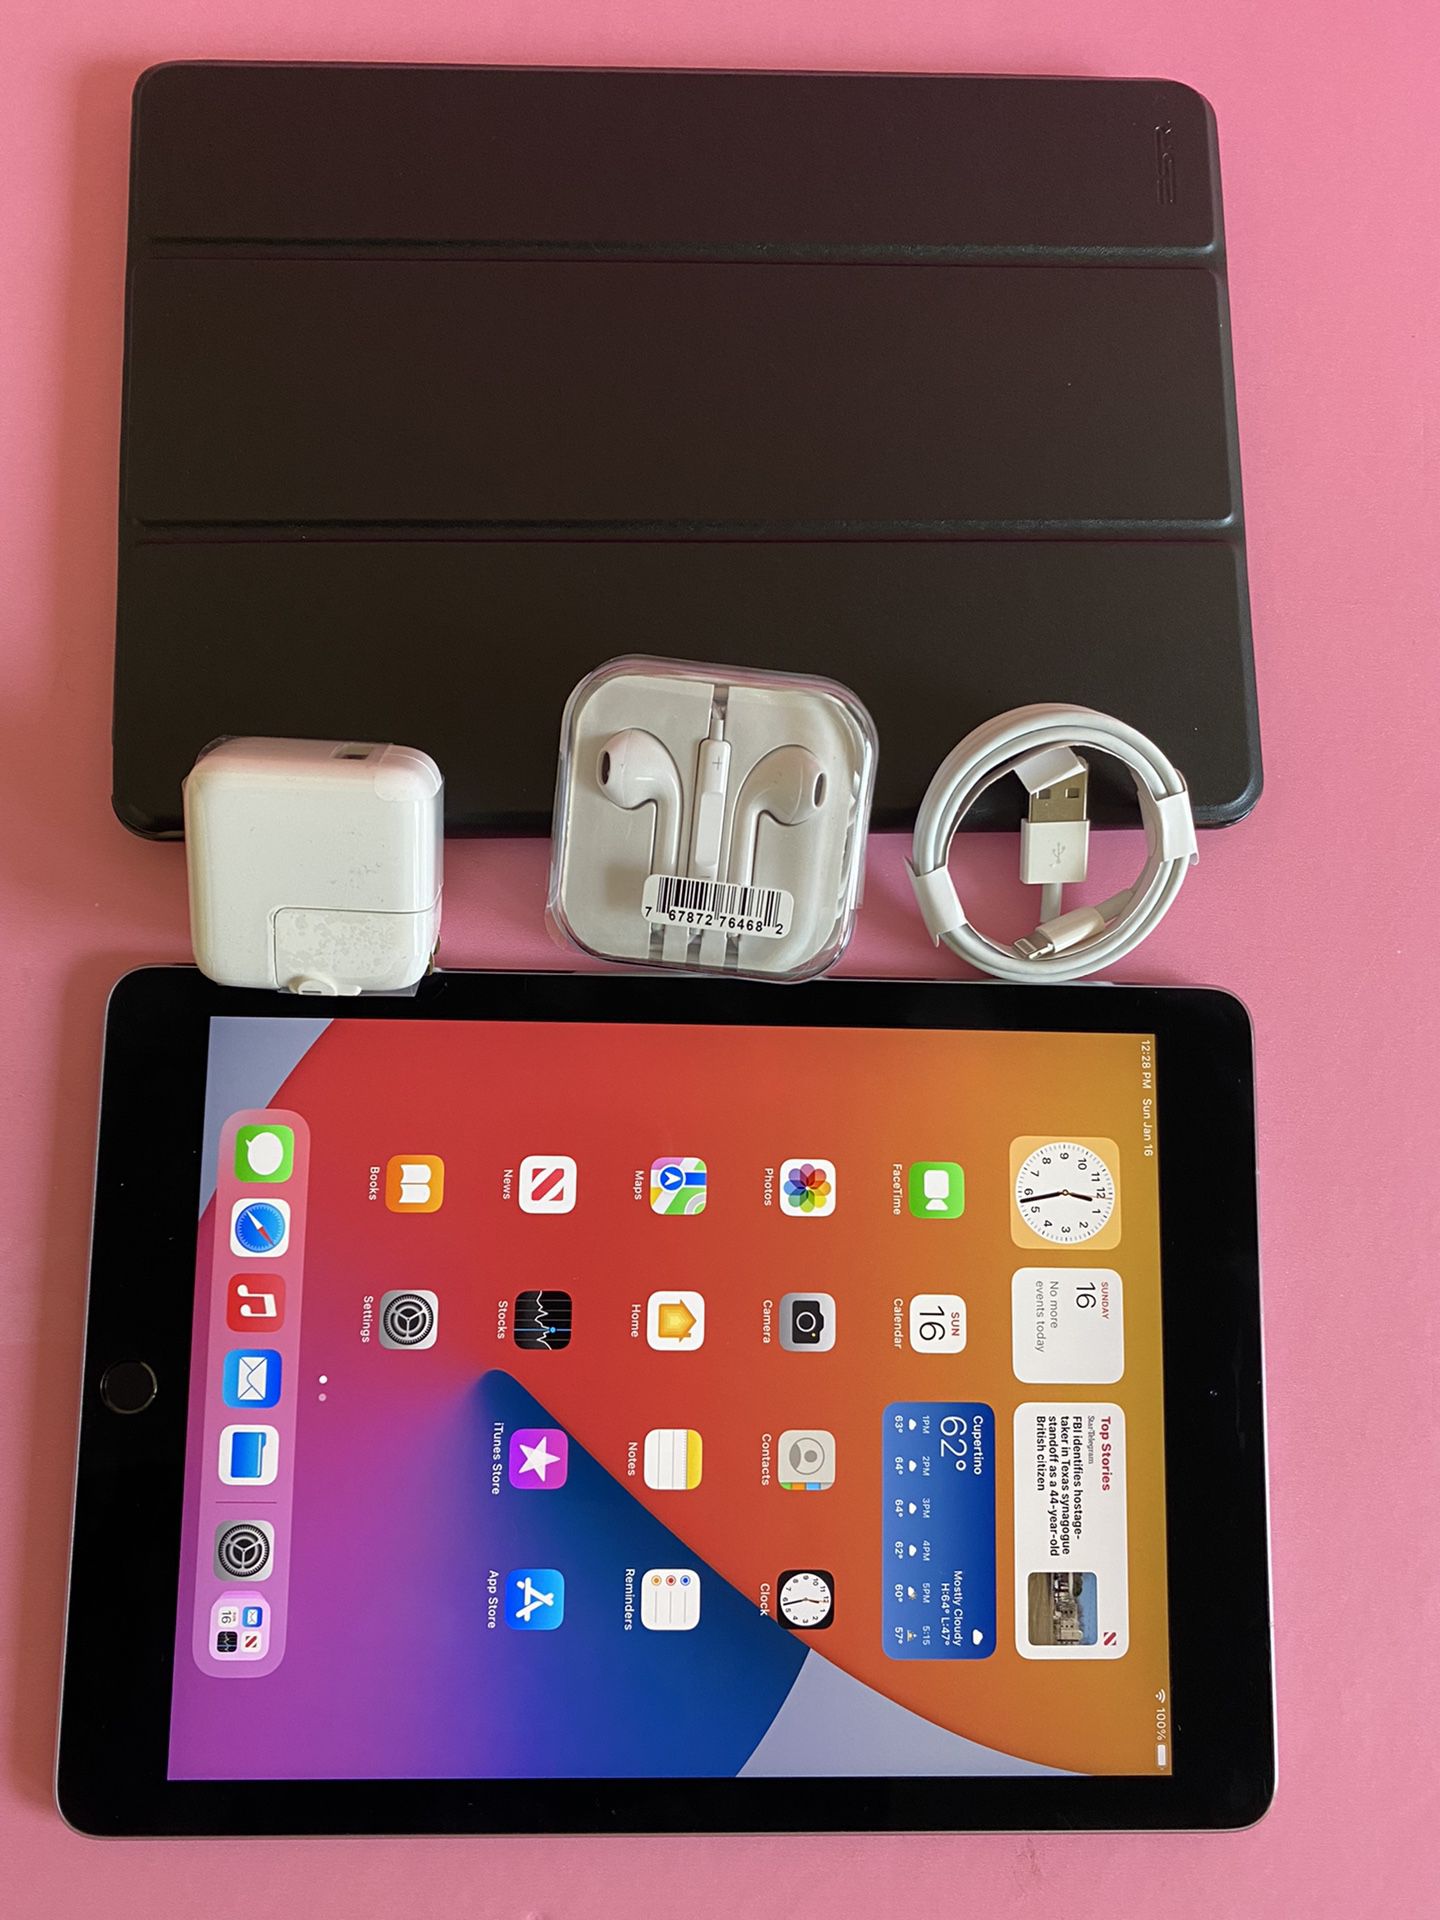 Apple IPad Pro 9.7” (Retina / Touch ID/ Latest IOS 15) 32GB WiFi + Cellular (AT&T, T-Mobile, Verizon etc) with Accesories (Apple Pen compatible)